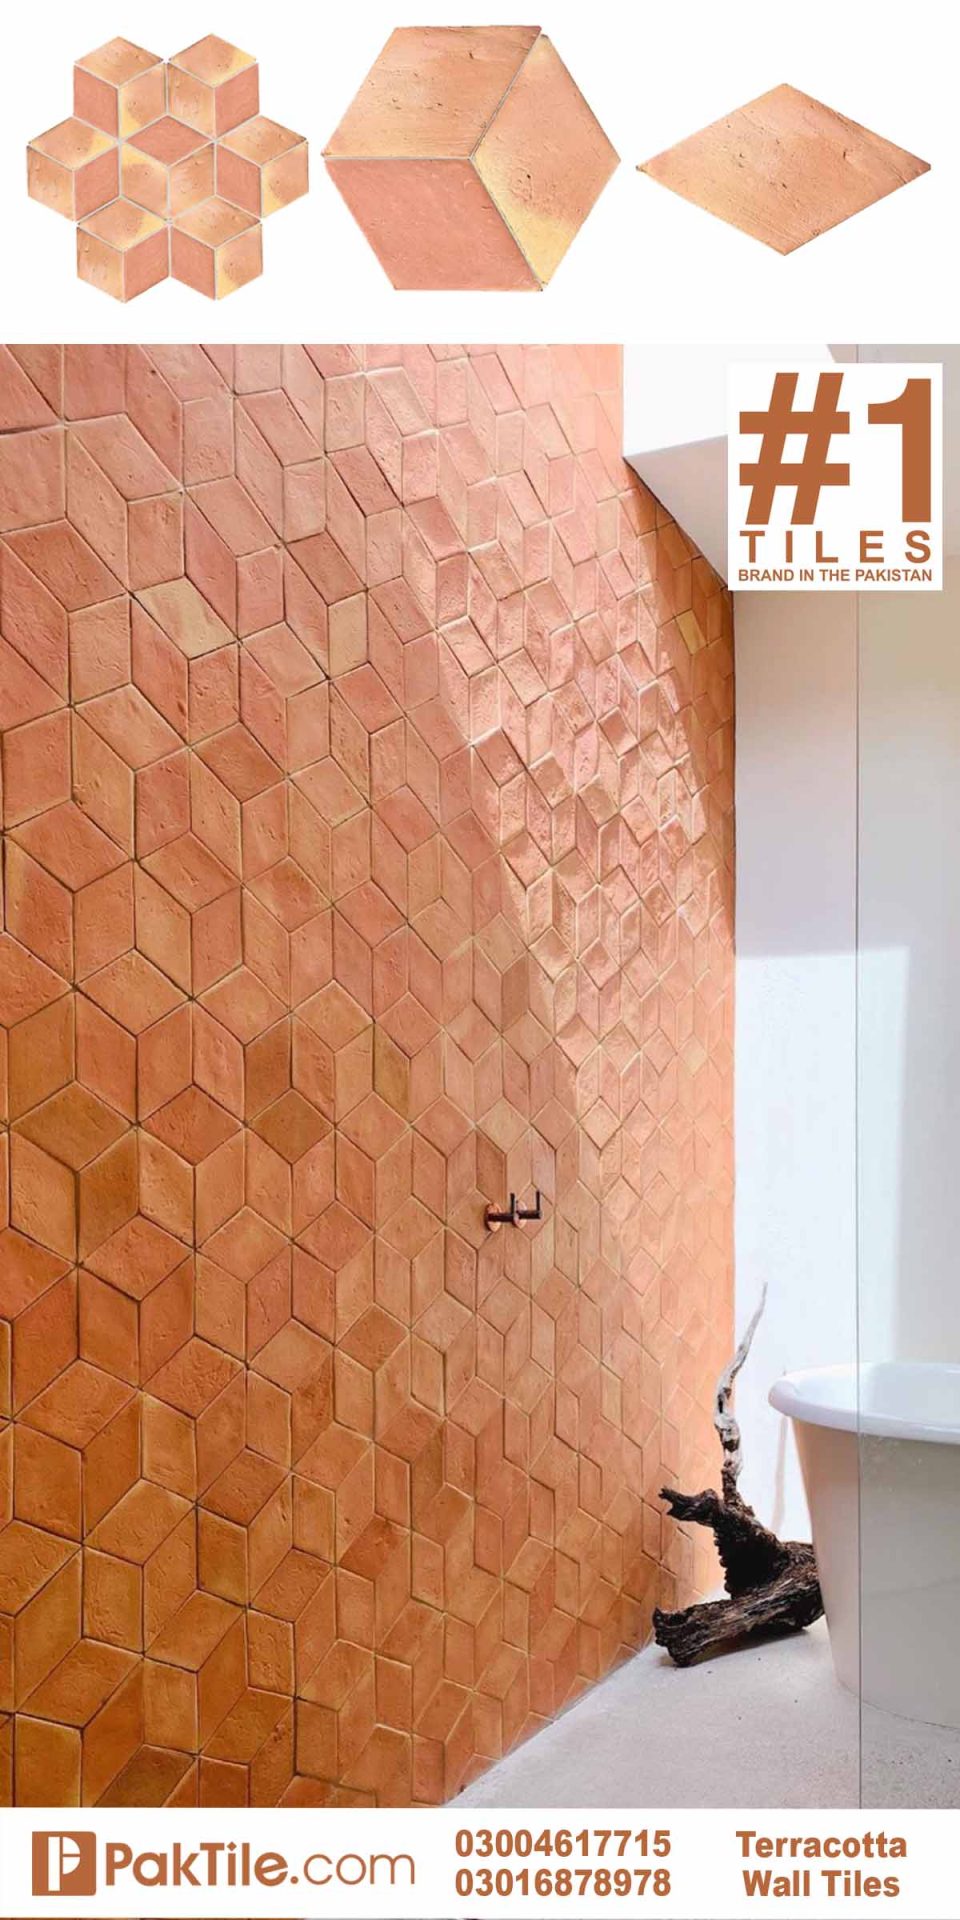 Terracotta Wall Tiles in Lahore